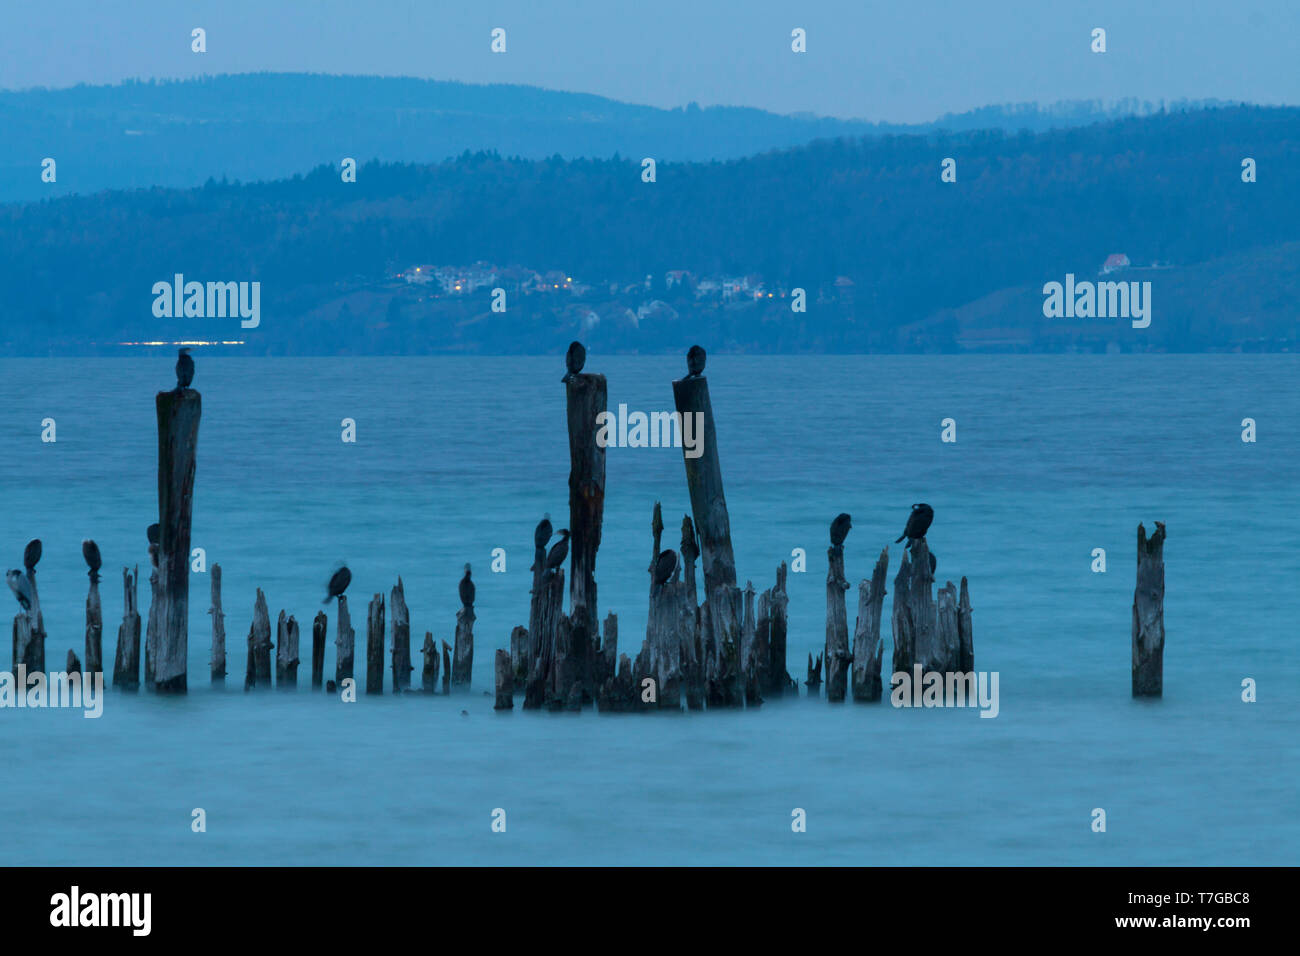 Flock of Great Cormorants (Phalacrocorax carbo subspecies sinensis) resting on wooden poles in mountain lake in Switzerland. Stock Photo